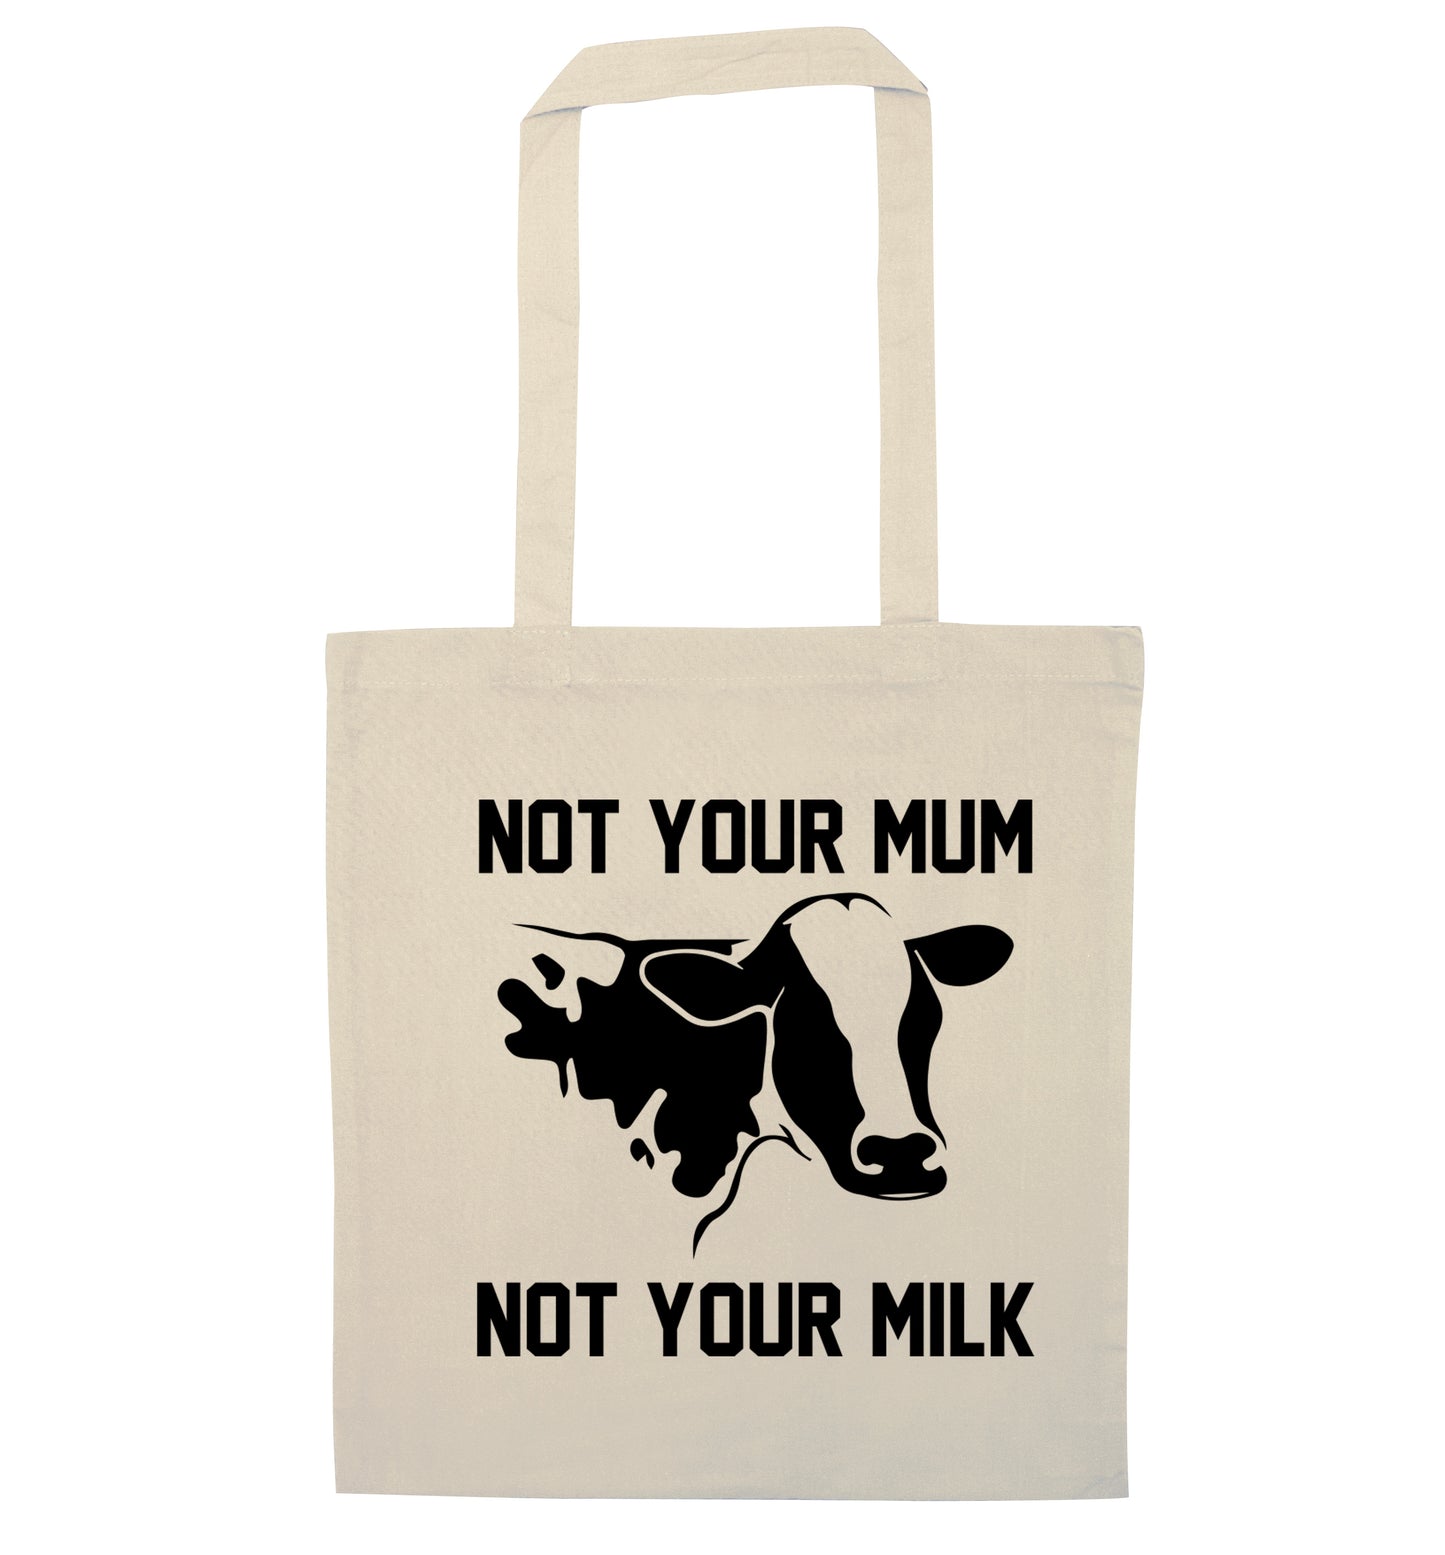 Not your mum not your milk natural tote bag